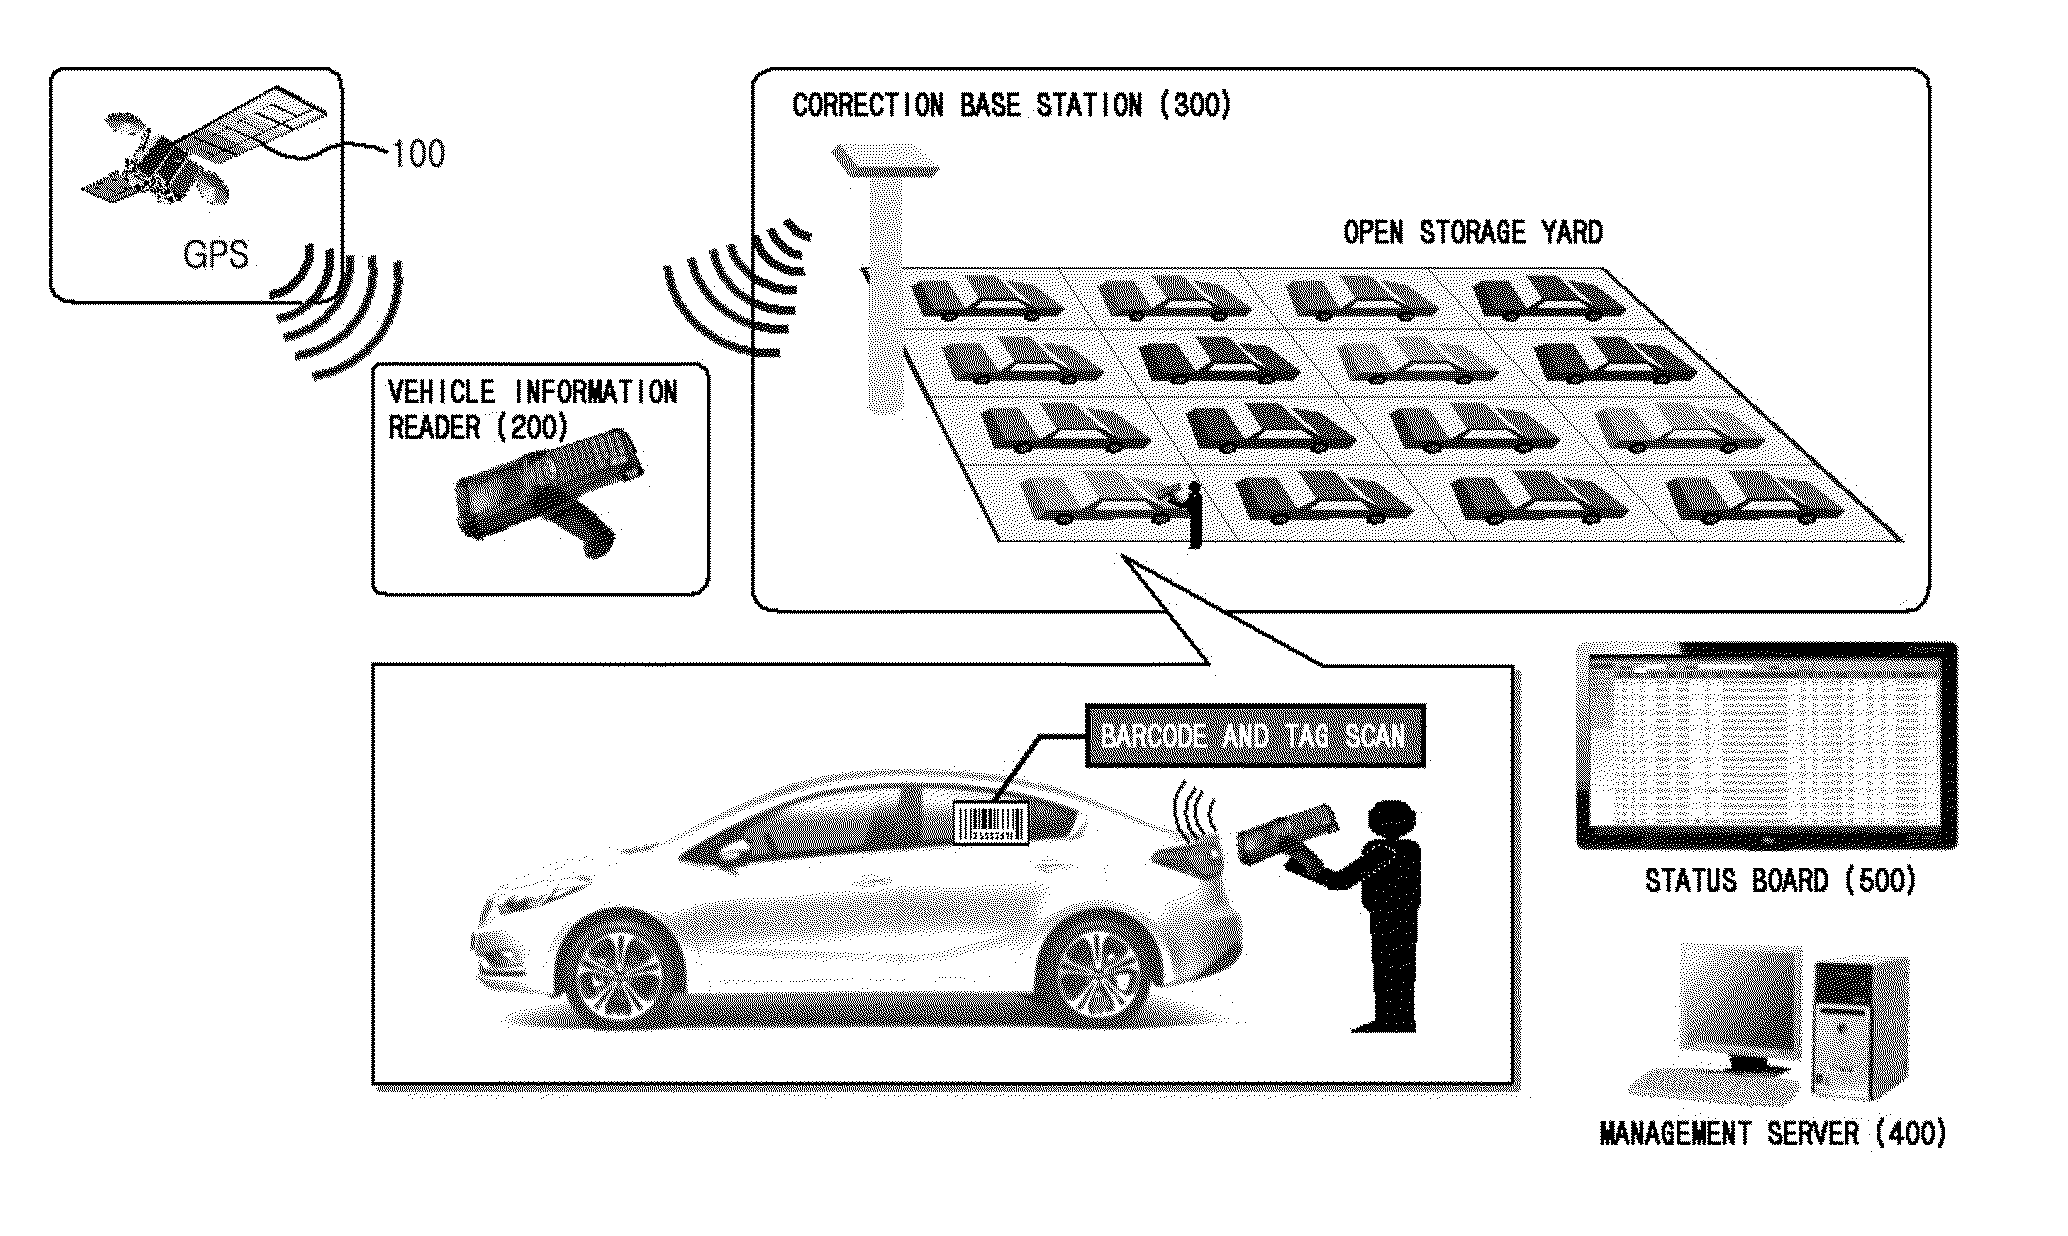 System for managing entry and exit of vehicles